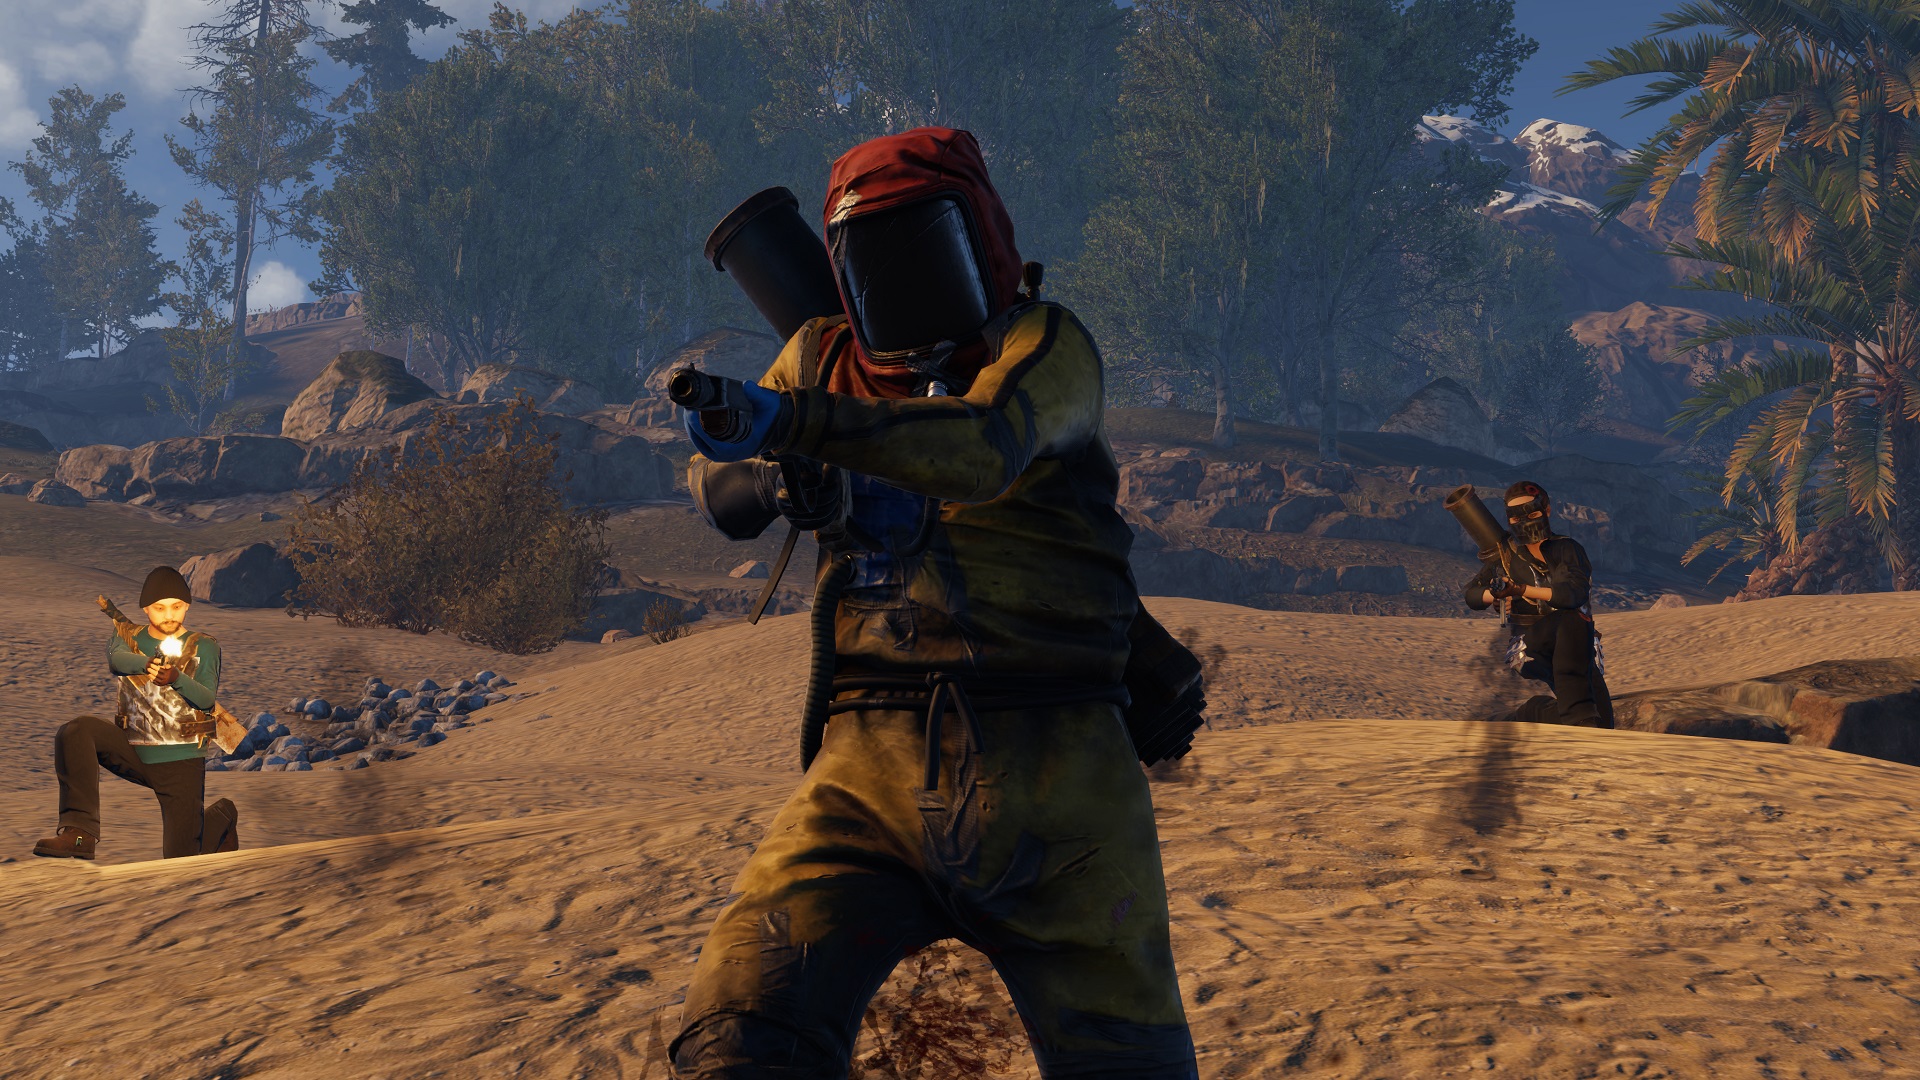 Rust Update 1.02 Patch Notes Reveal Fixes for Poor Texture Quality on